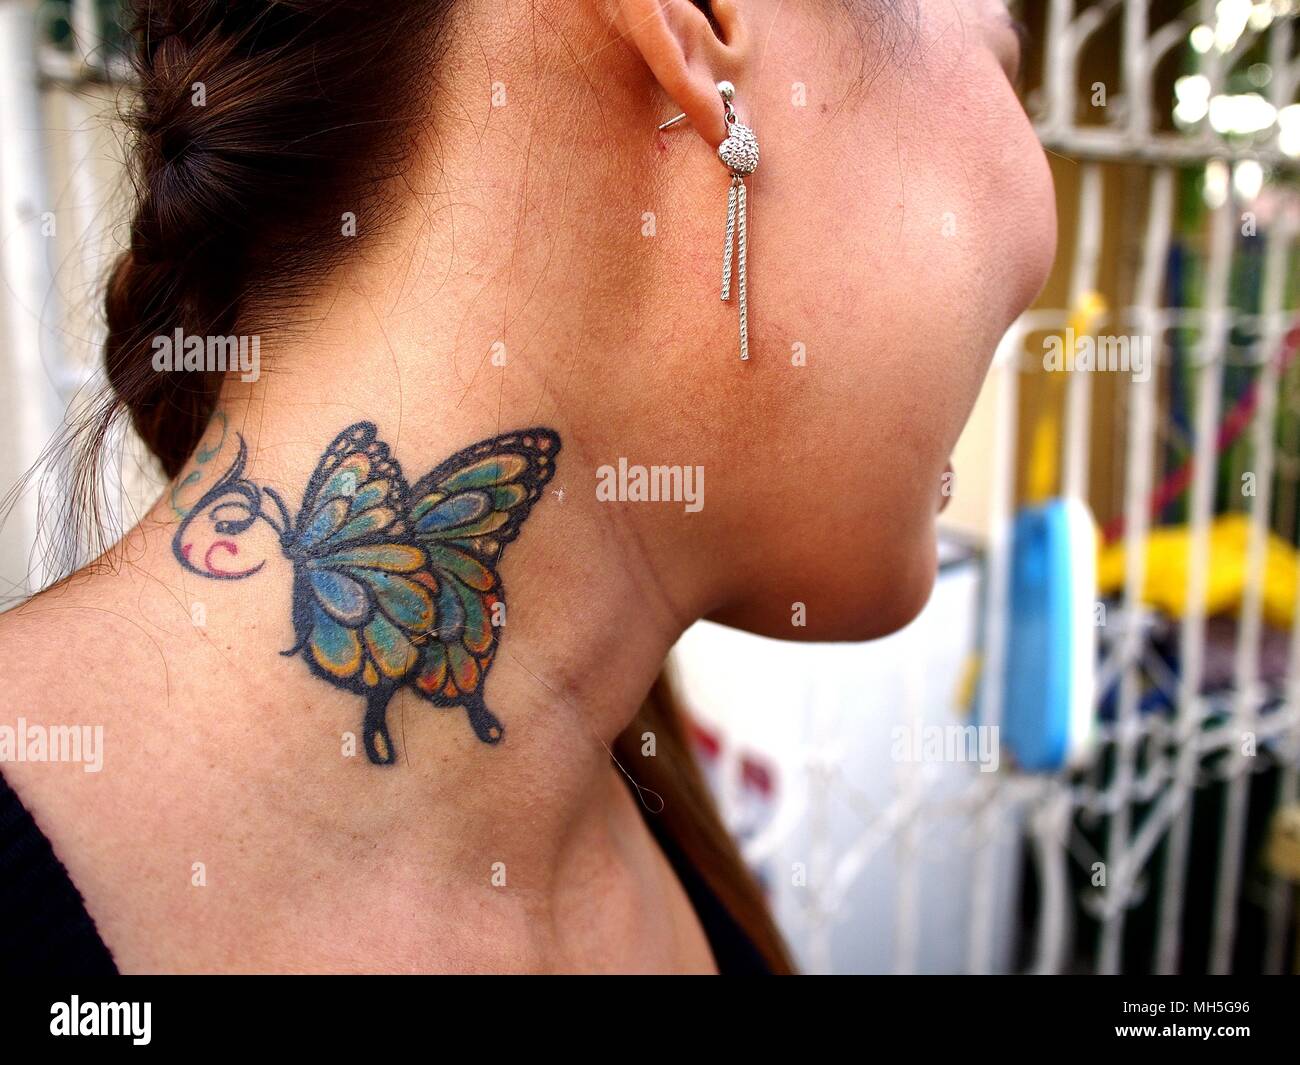 200 Butterfly Tattoo IdeasIs Behind The Ear Best Choice